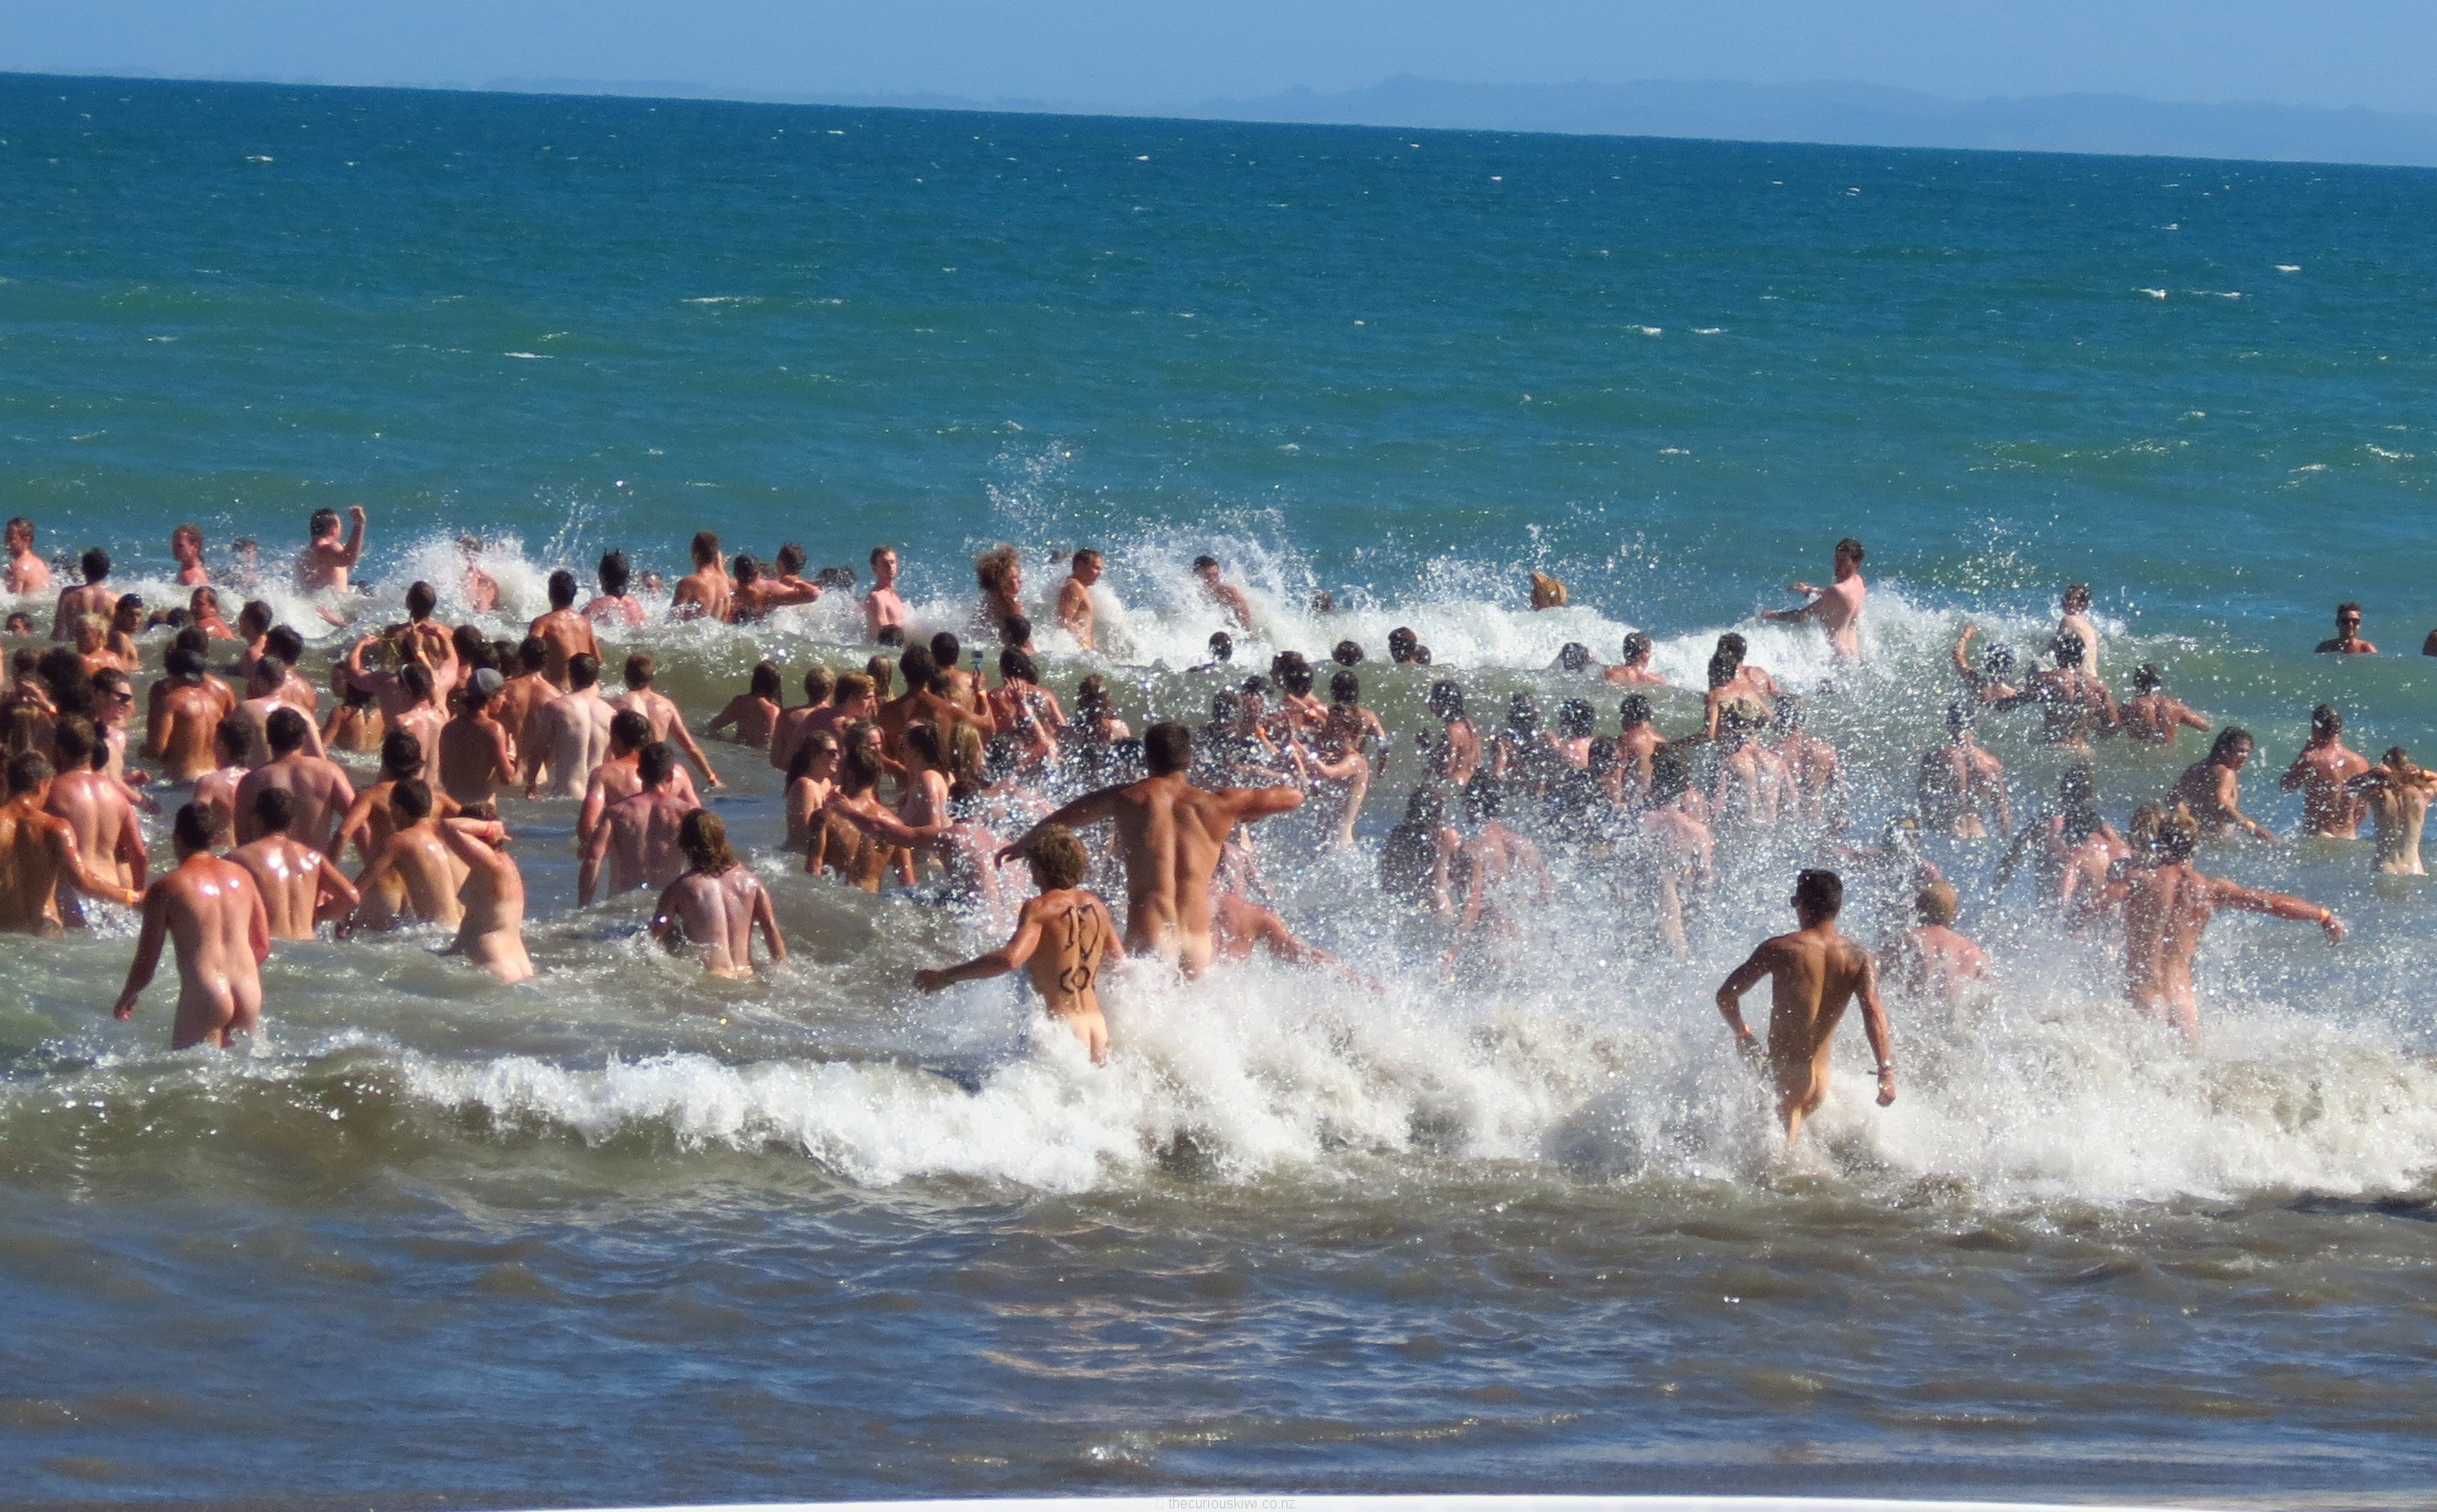 Largest Skinny Dipping Guinness World Record Attempt - Gisborne 31/12/2013